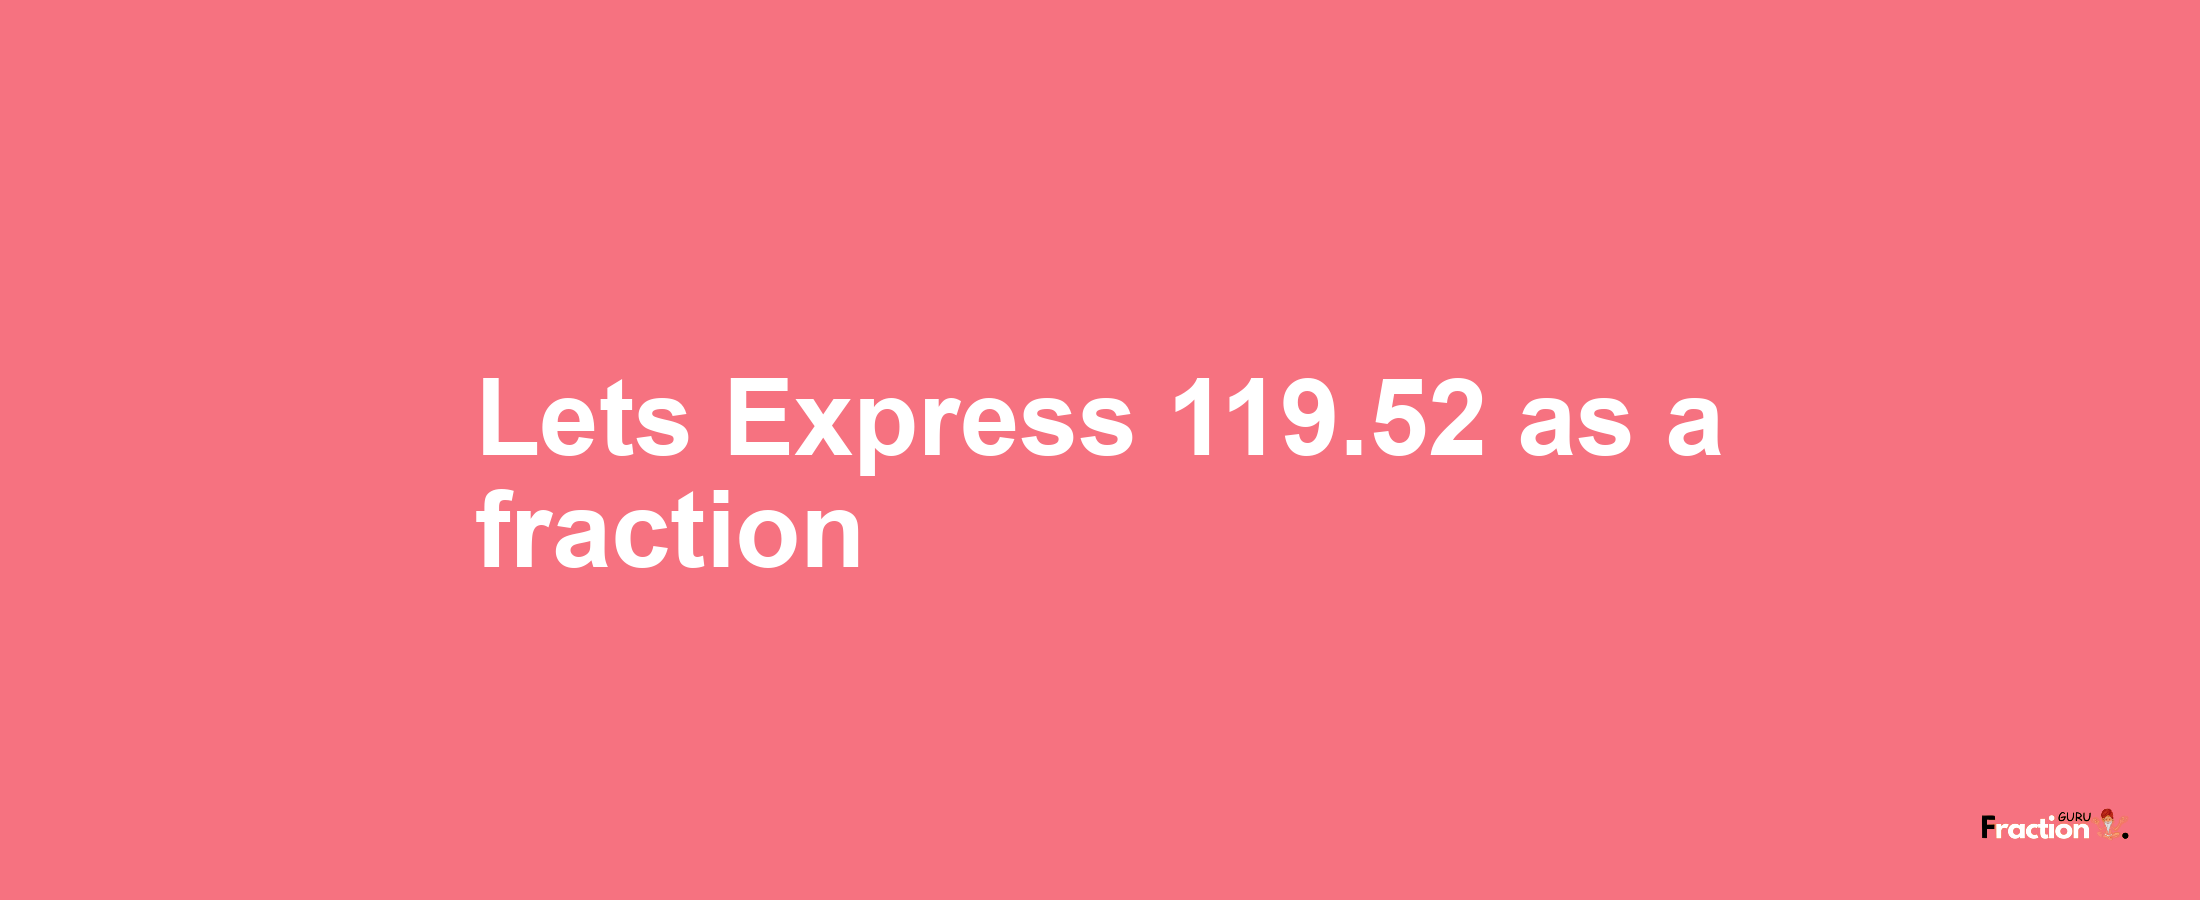 Lets Express 119.52 as afraction